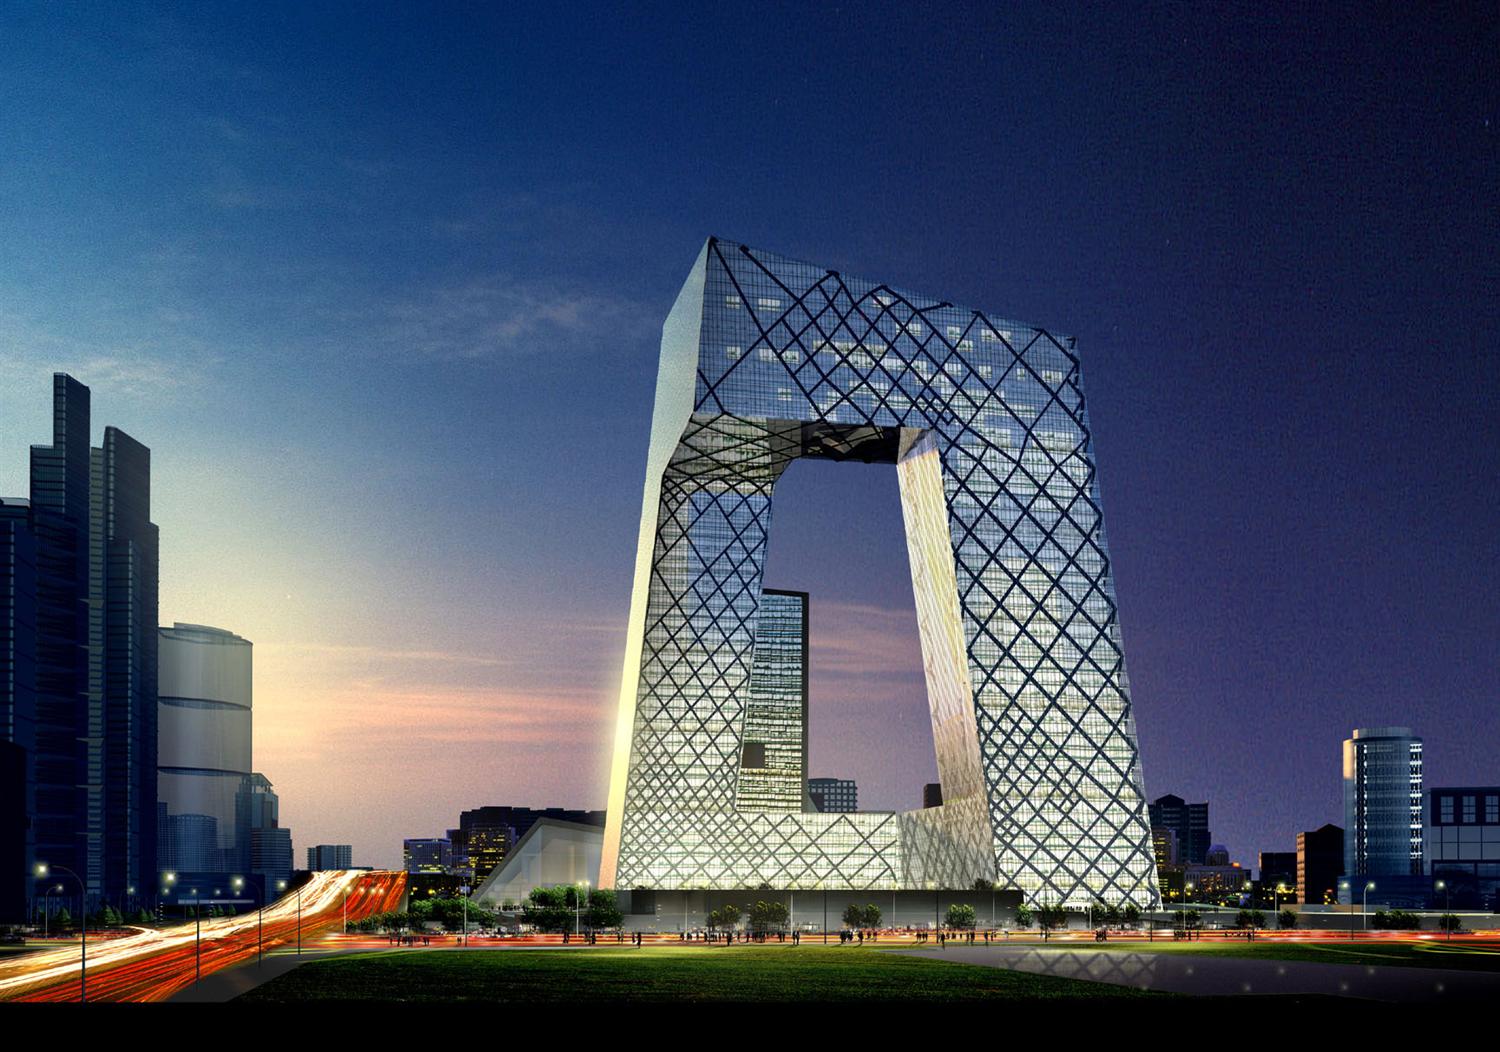 China Central Television Headquarters - A Masterpiece of Architecture ...